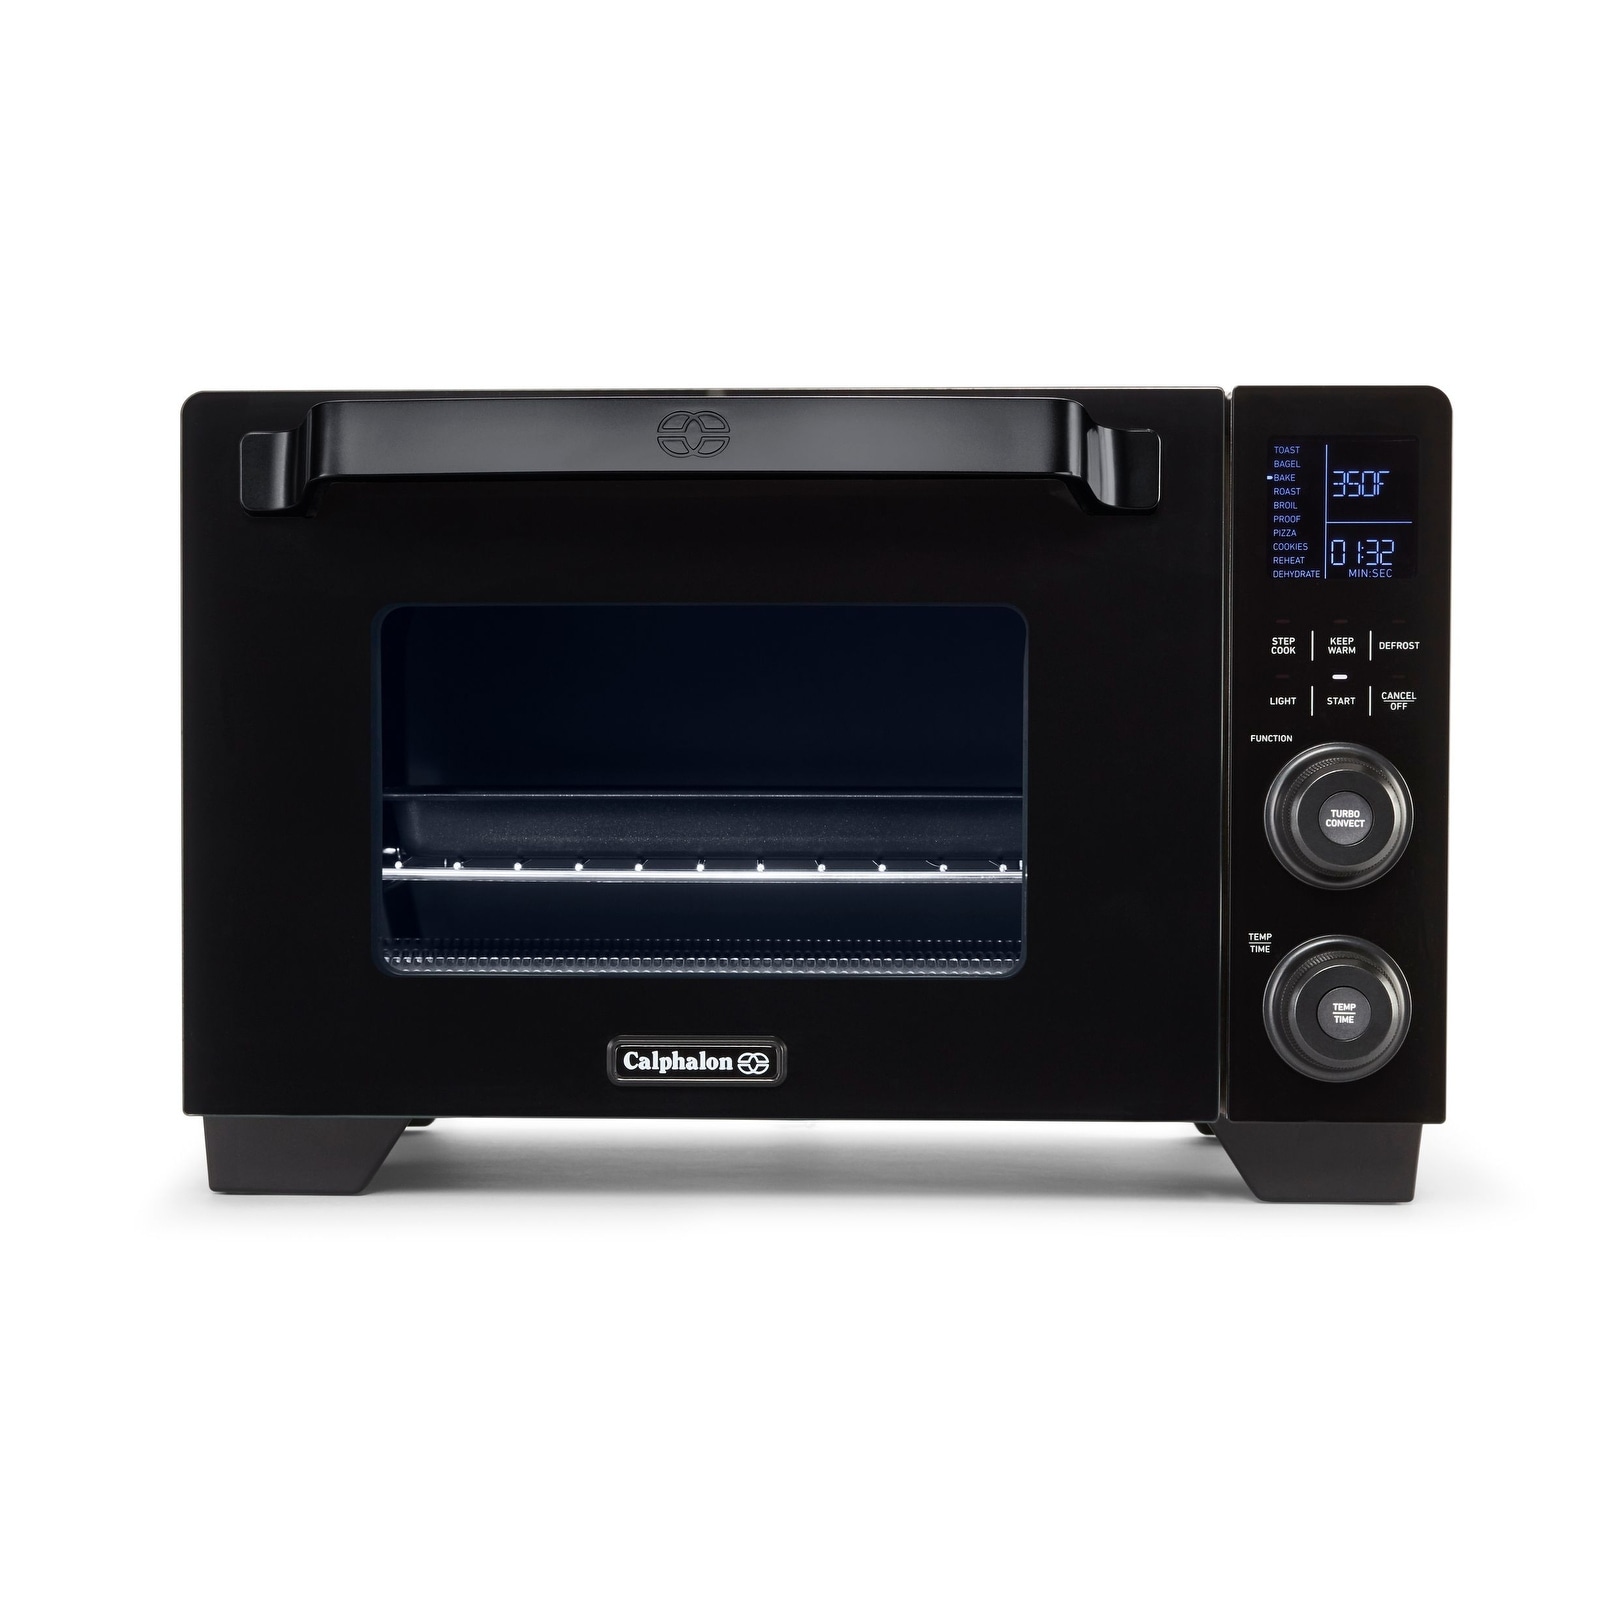 https://ak1.ostkcdn.com/images/products/is/images/direct/3eab6e85e361854884c1cad9d94dc1b3c9136a01/Calphalon-Performance-Cool-Touch-Oven.jpg